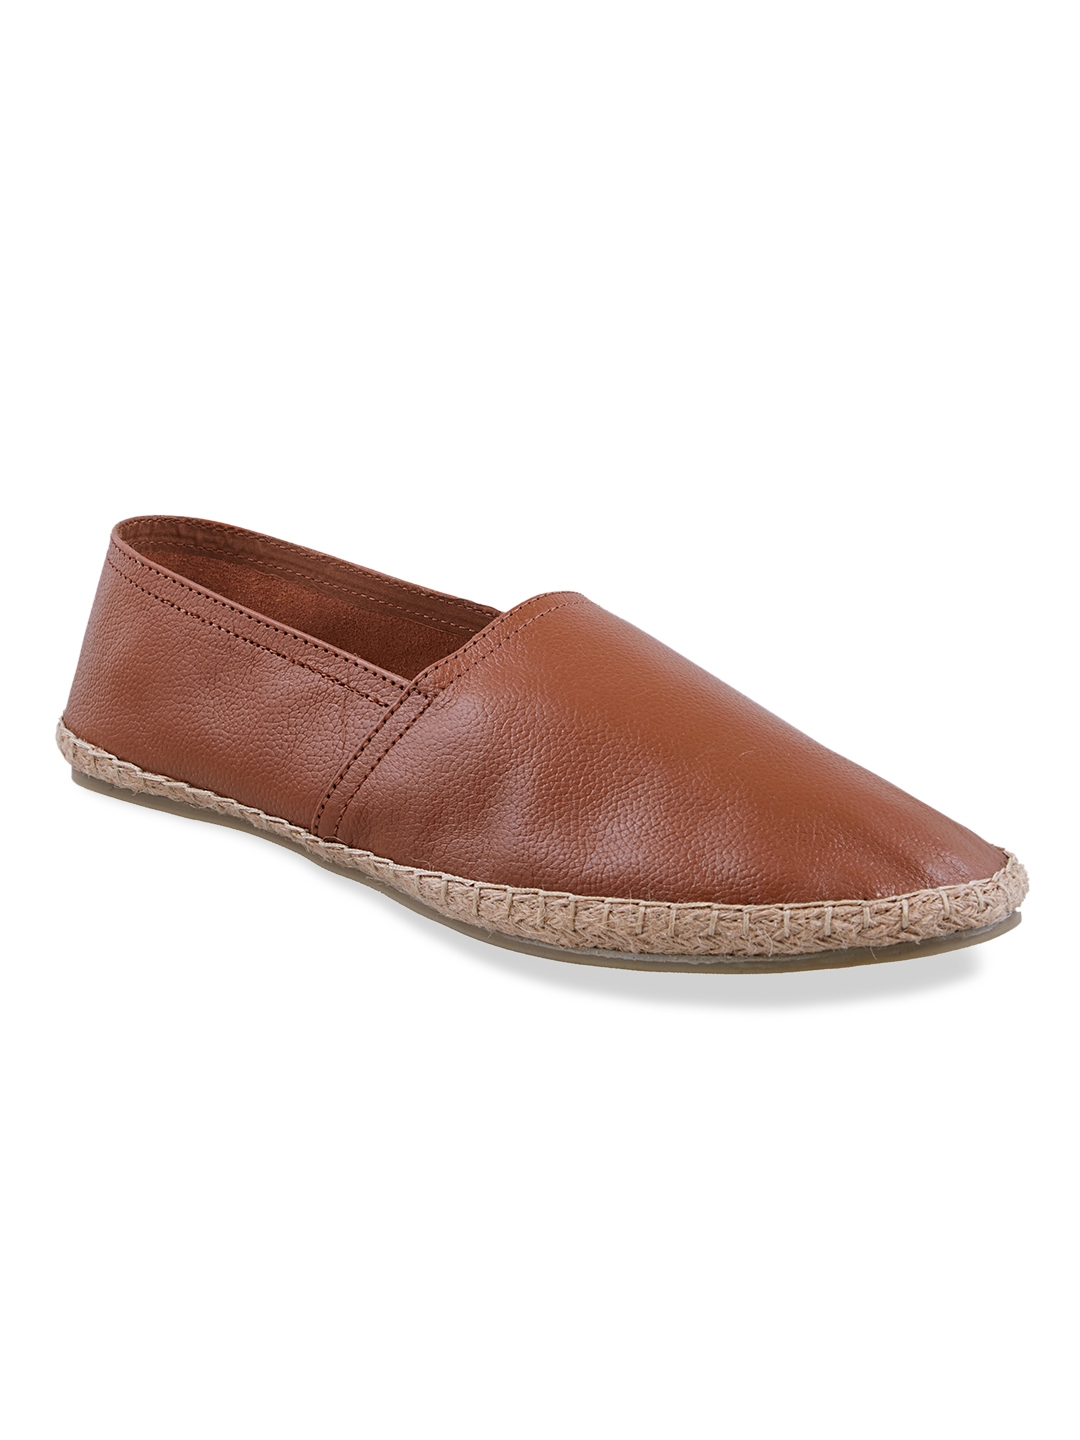 Buy SKO Brown Leather Espadrilles - Casual Shoes for Men 3853923 | Myntra